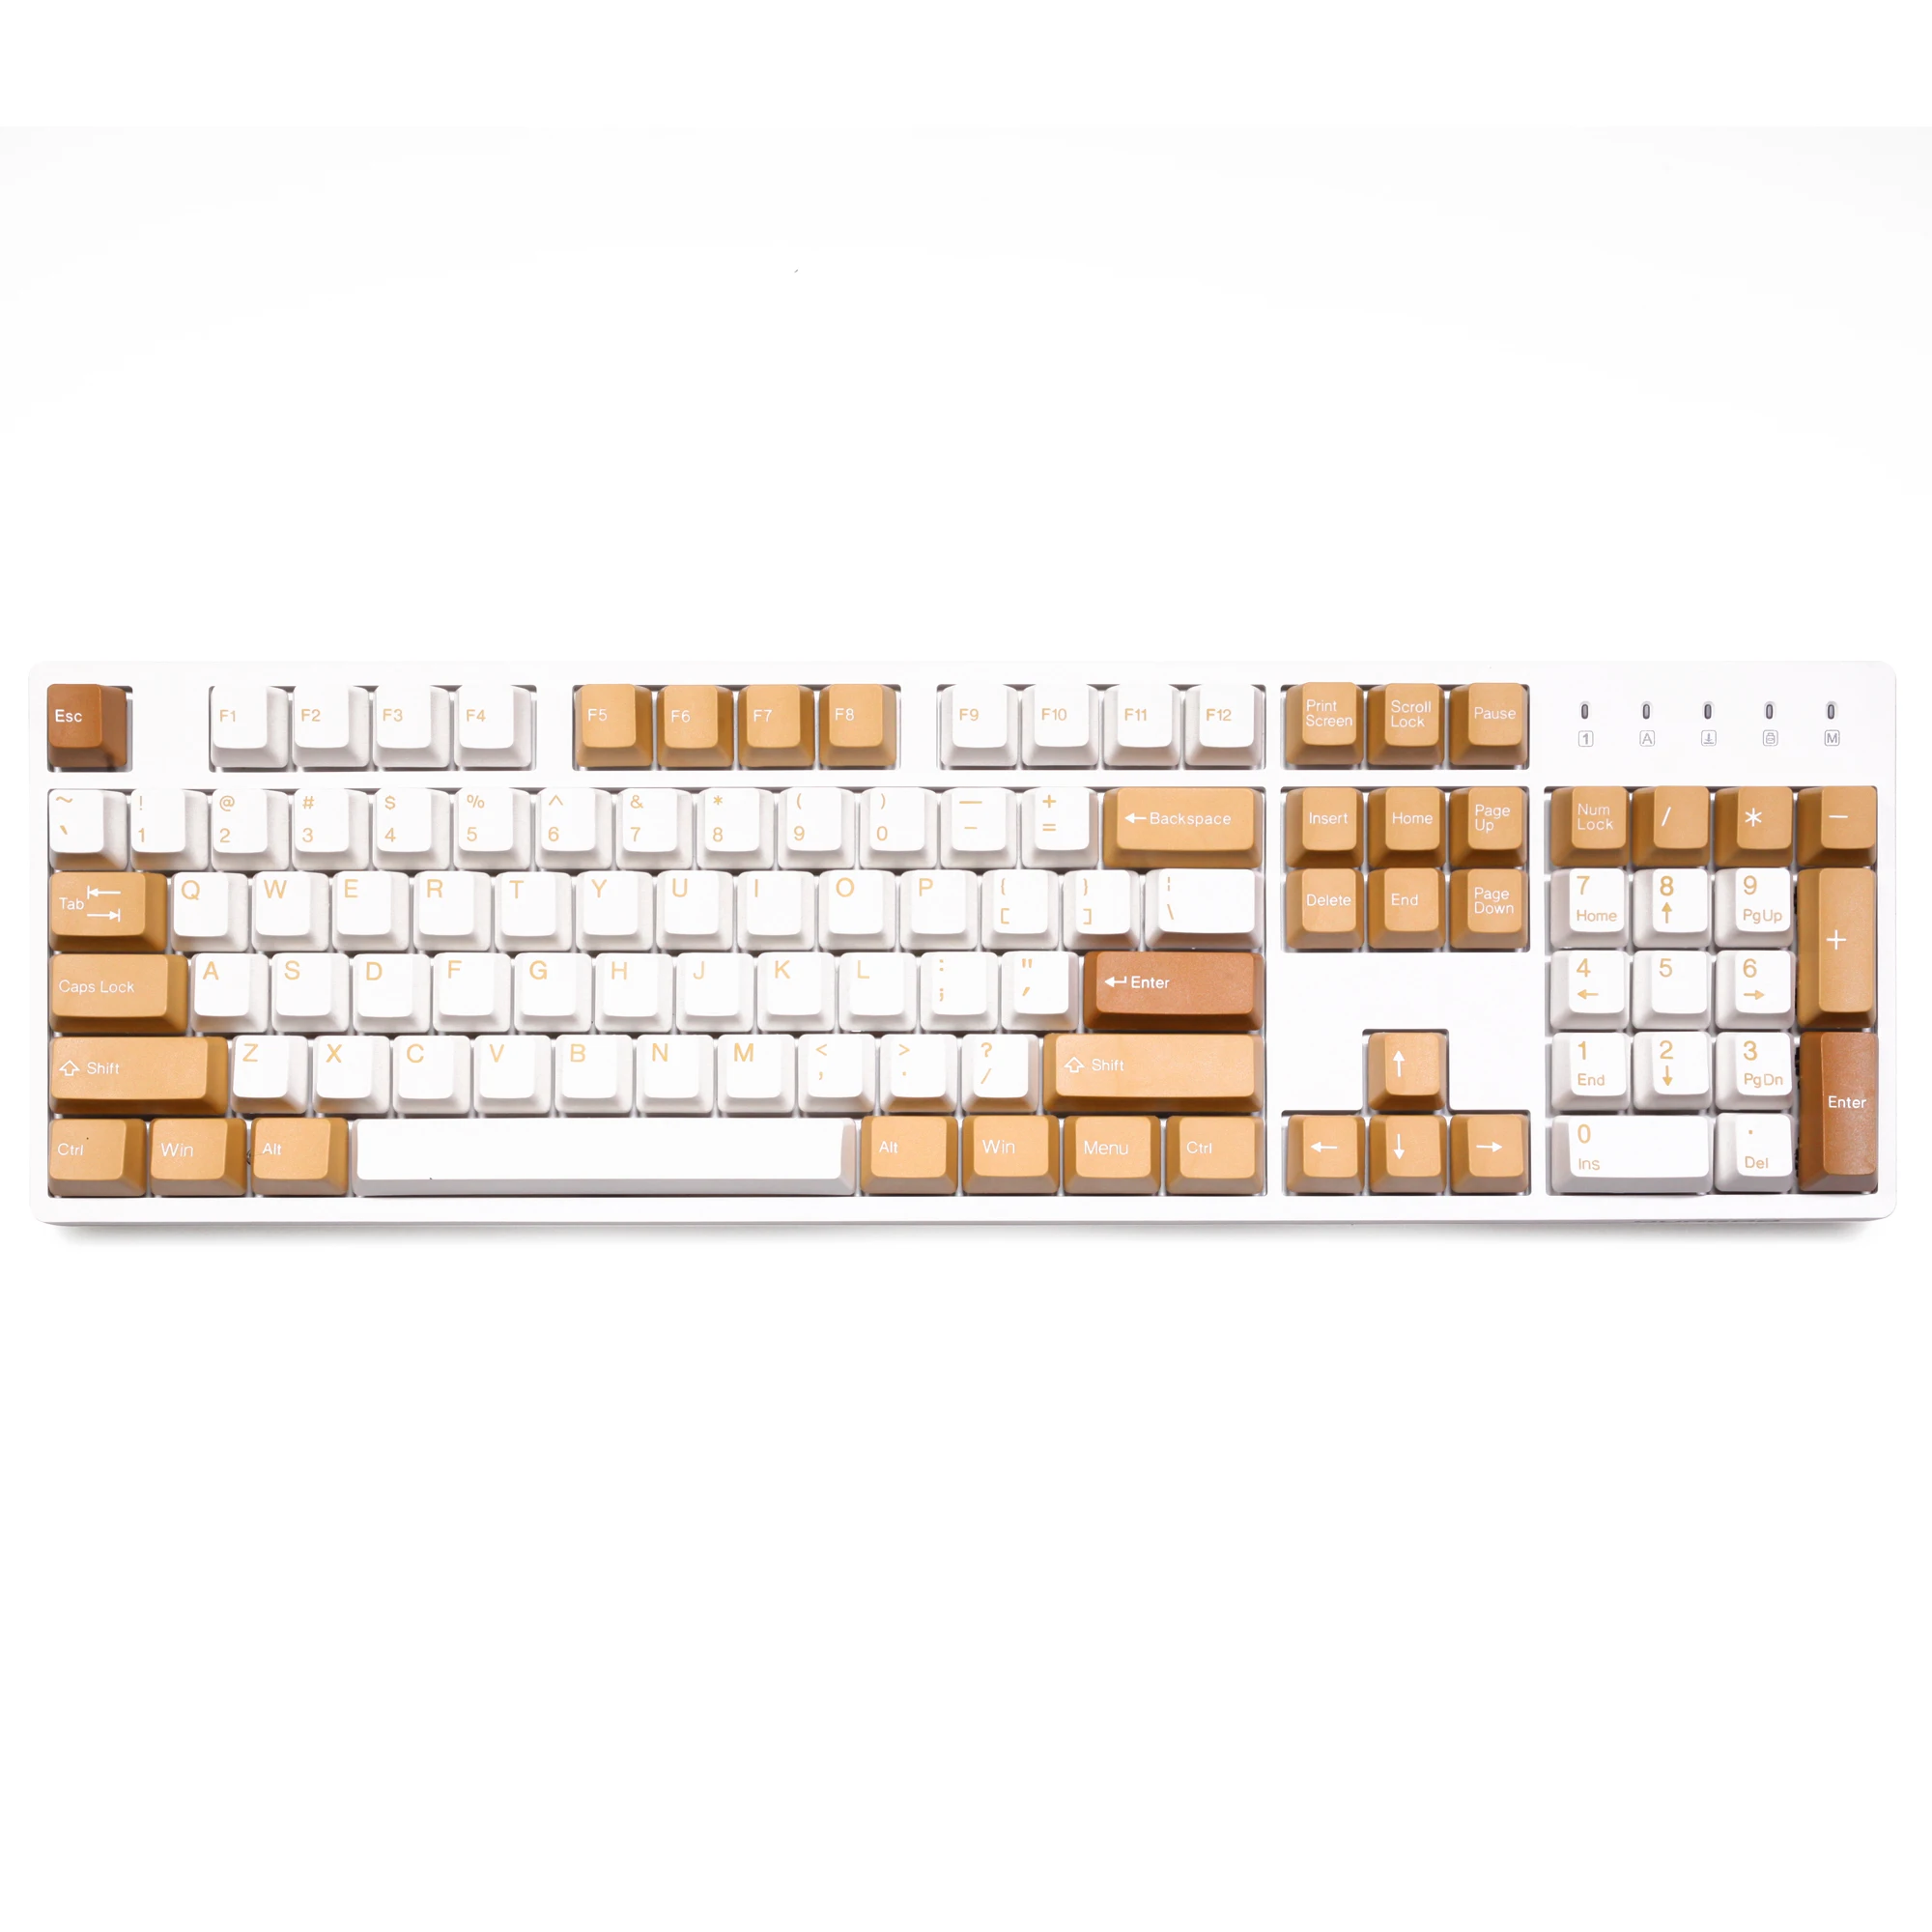 taihao Vintage Camel ABS double shot keycaps for diy gaming mechanical keyboard oem profile Beige Yellow - Pudding Keycap